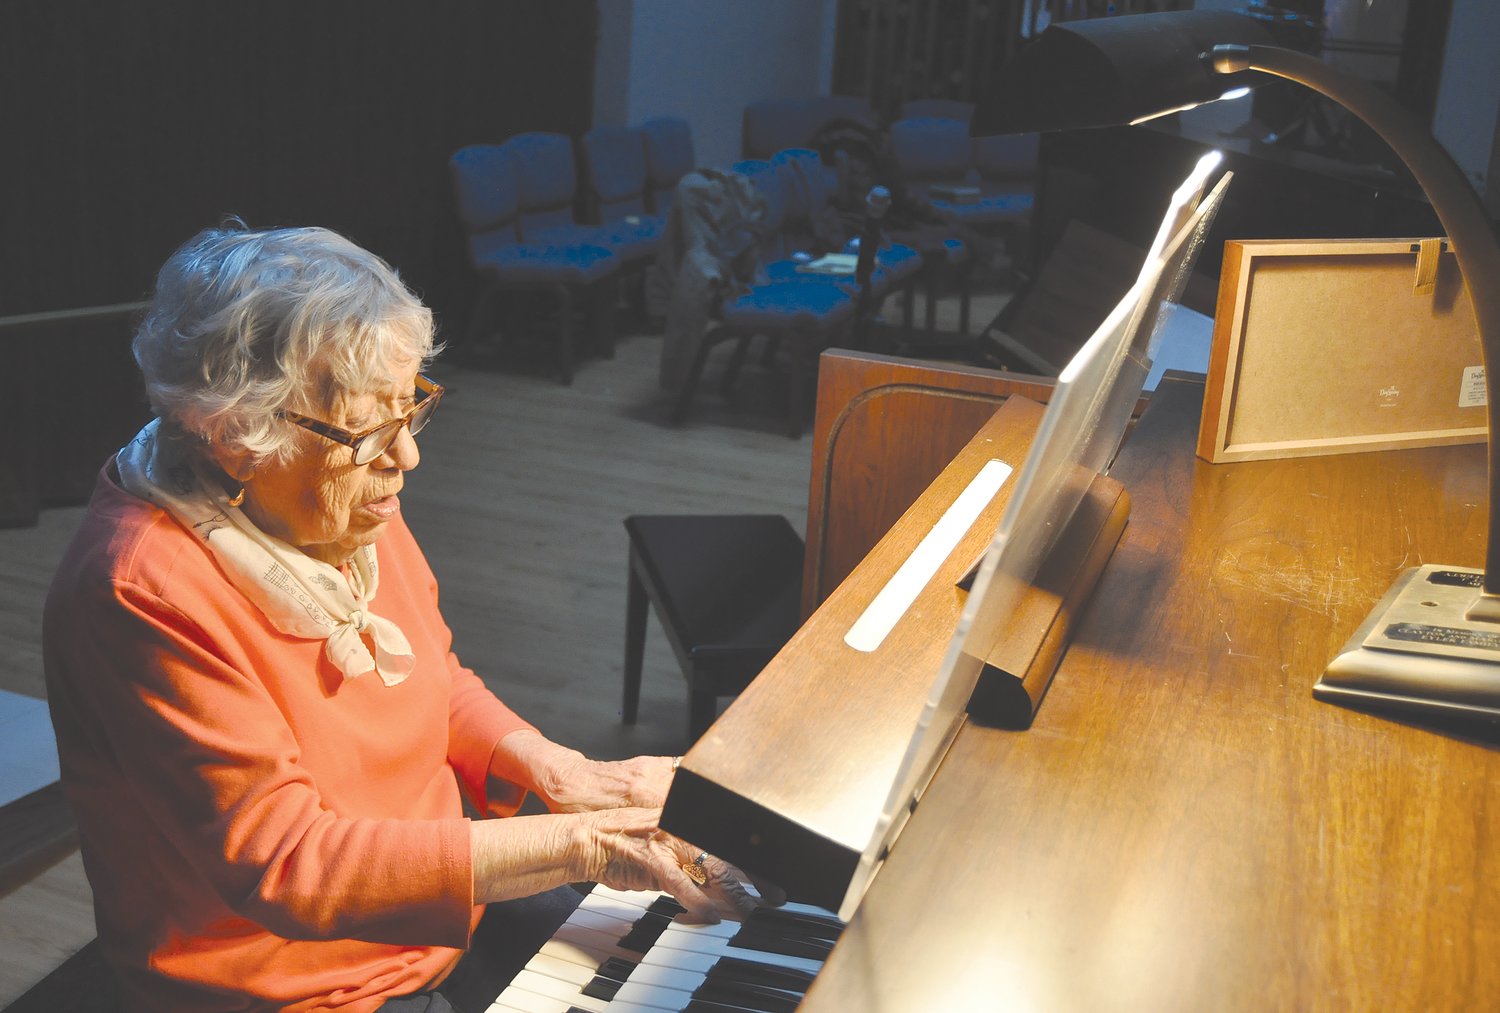 Margy McCafferty plays the organ at St. Bernard Catholic Church. McCafferty retired from playing after nearly 80 years.